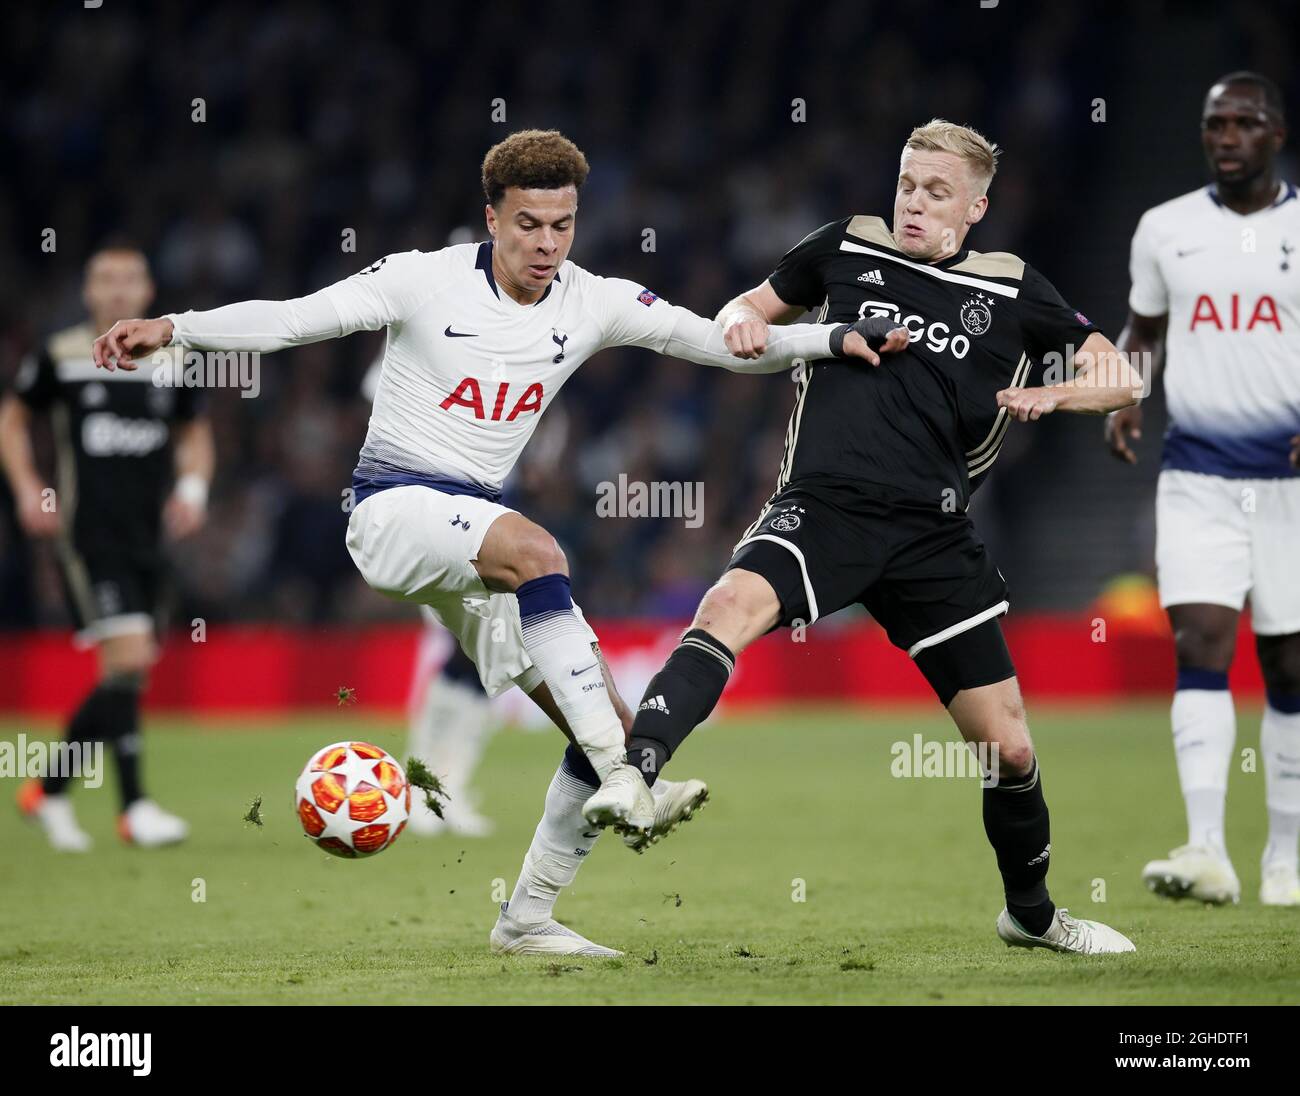 dele-alli-of-tottenham-and-donny-van-de-beek-of-ajax-during-the-uefa-champions-league-match-at-the-tottenham-hotspur-stadium-london-picture-date-30th-april-2019-picture-credit-should-read-david-kleinsportimage-via-pa-images-2GHDTF1.jpg